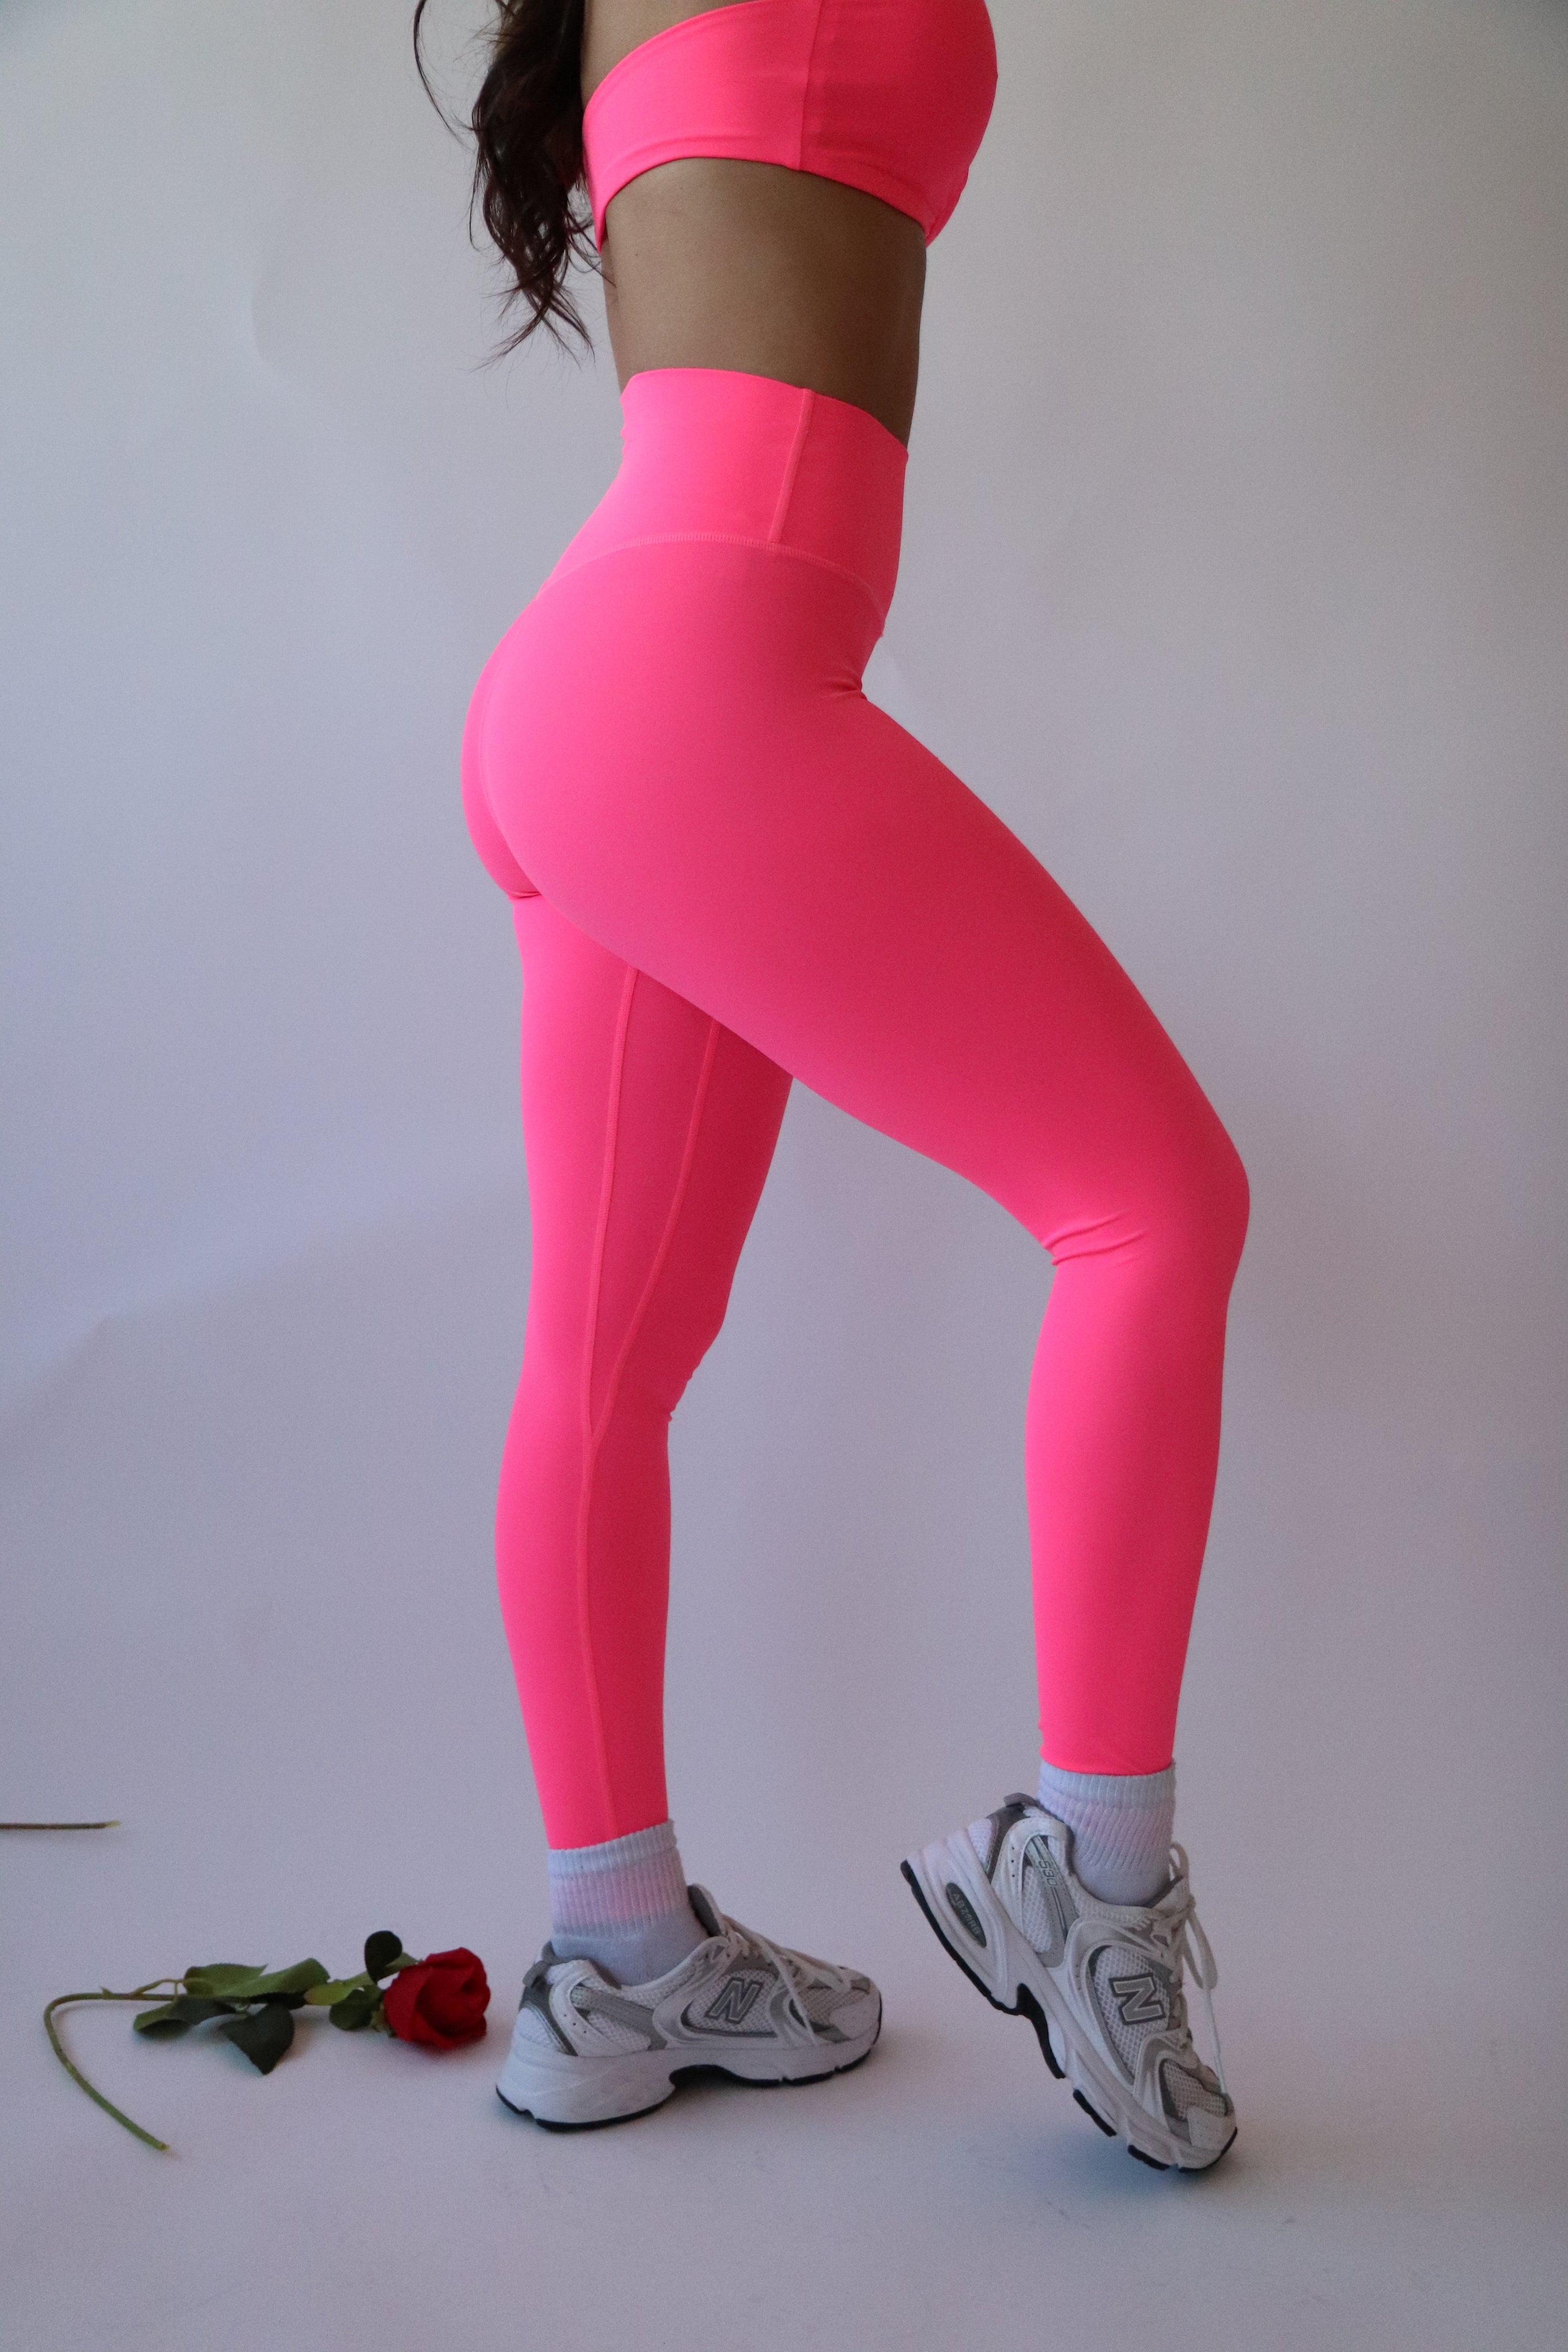 Is That The New Neon Pink High Waist Leggings ??